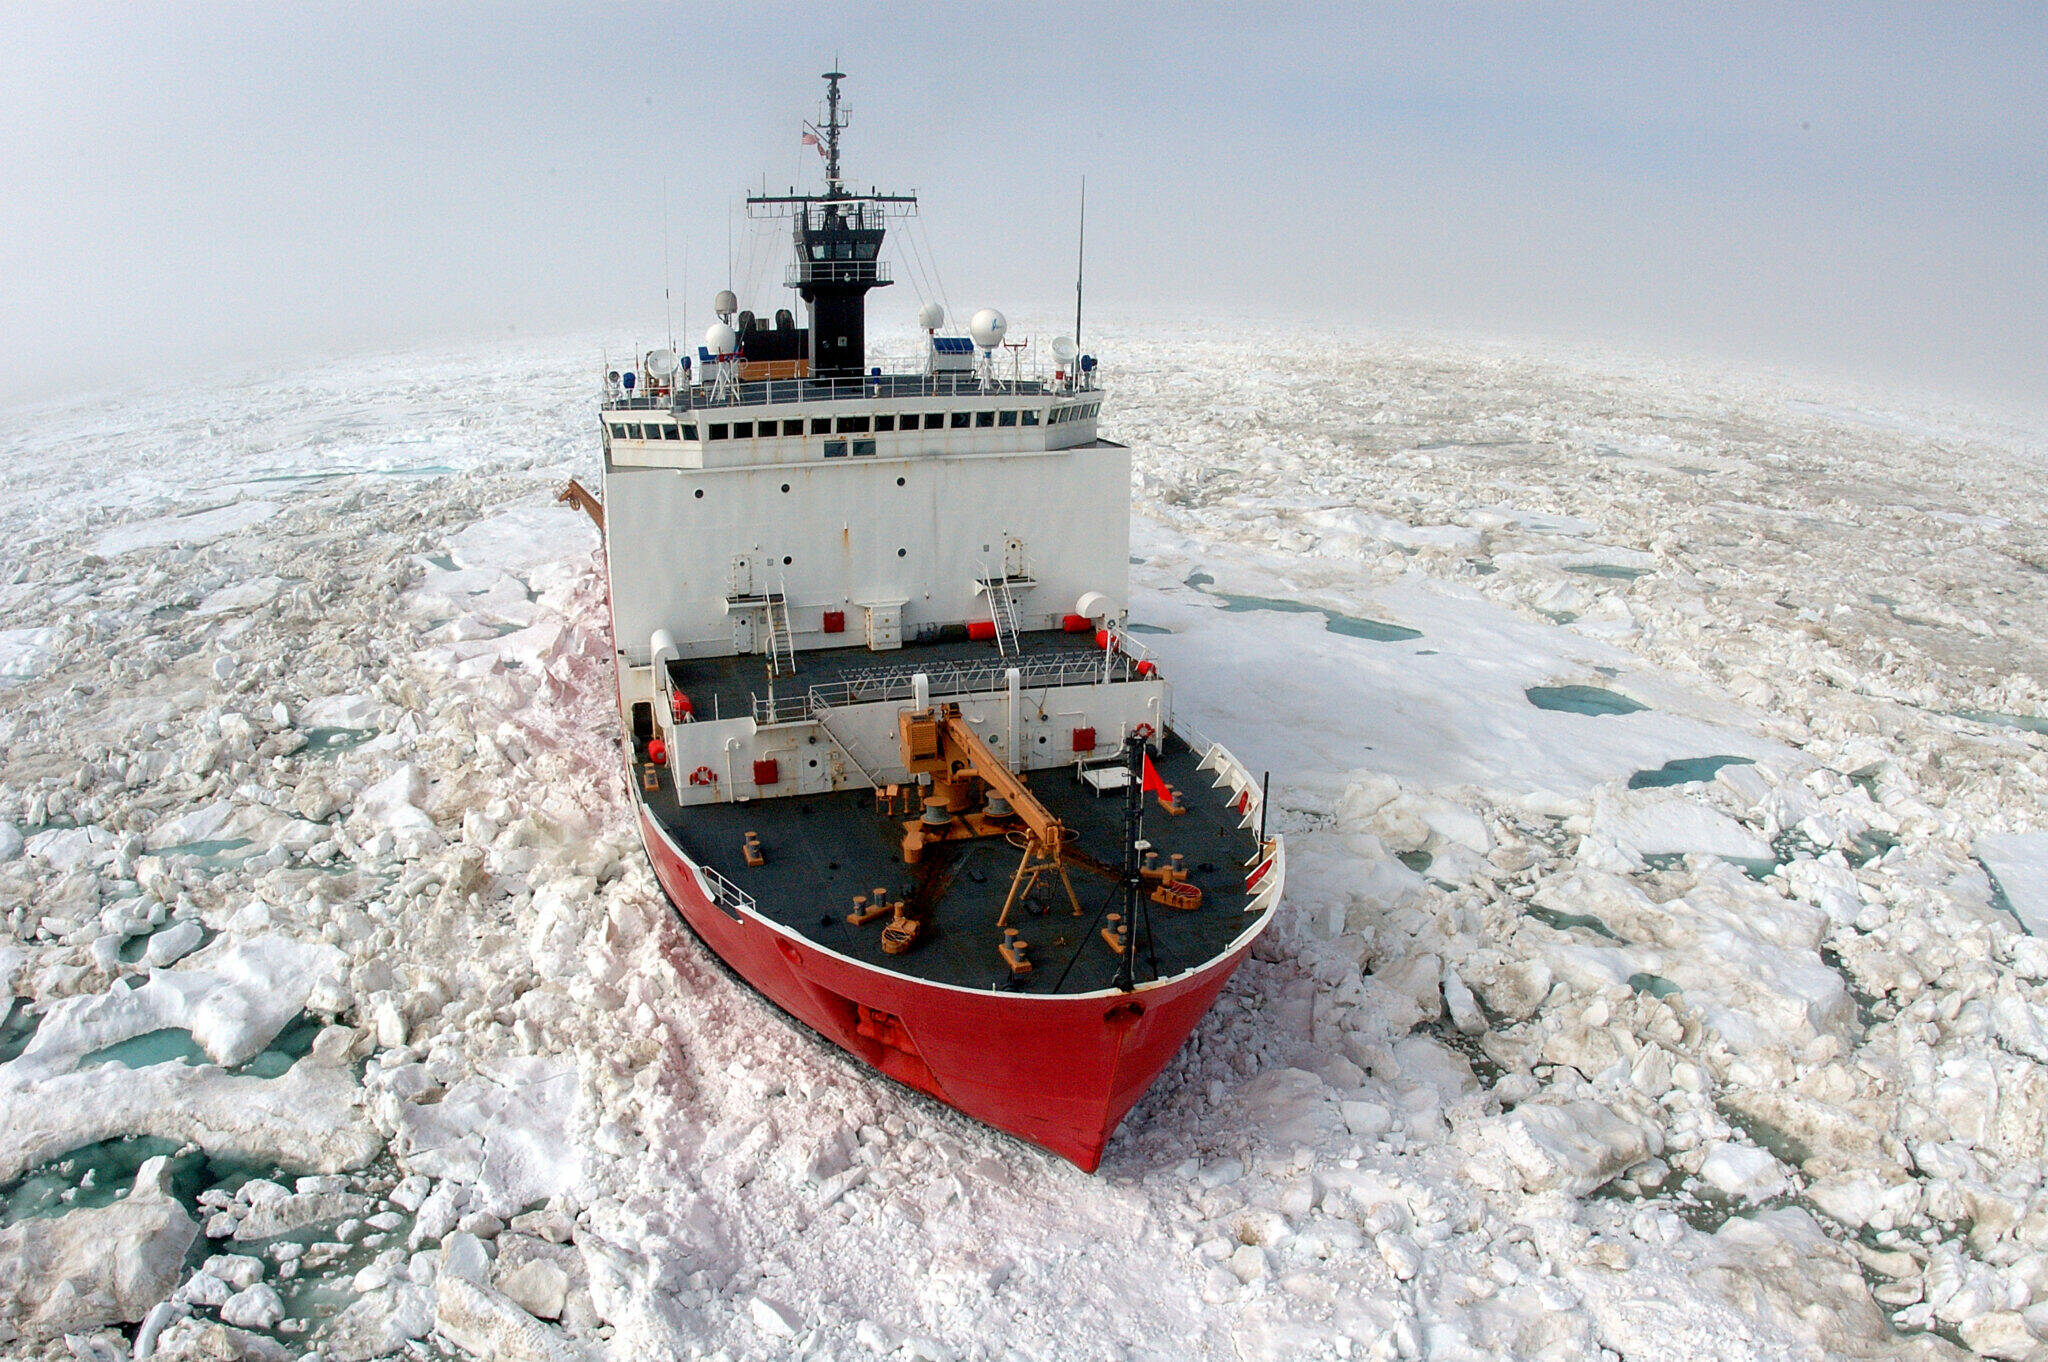 The U.S. Coast Guard Cutter Healy, a 420-foot icebreaker homeported in Seattle, breaks ice in support of scientific research in the Arctic Ocean during a 2006 cruise. The Healy is now on its way to Alaska and scheduled to complete three missions this year, including a sailing through the Northwest Passage to Greenland. (Petty Officer Second Class Prentice Danner/U.S. Coast Guard)